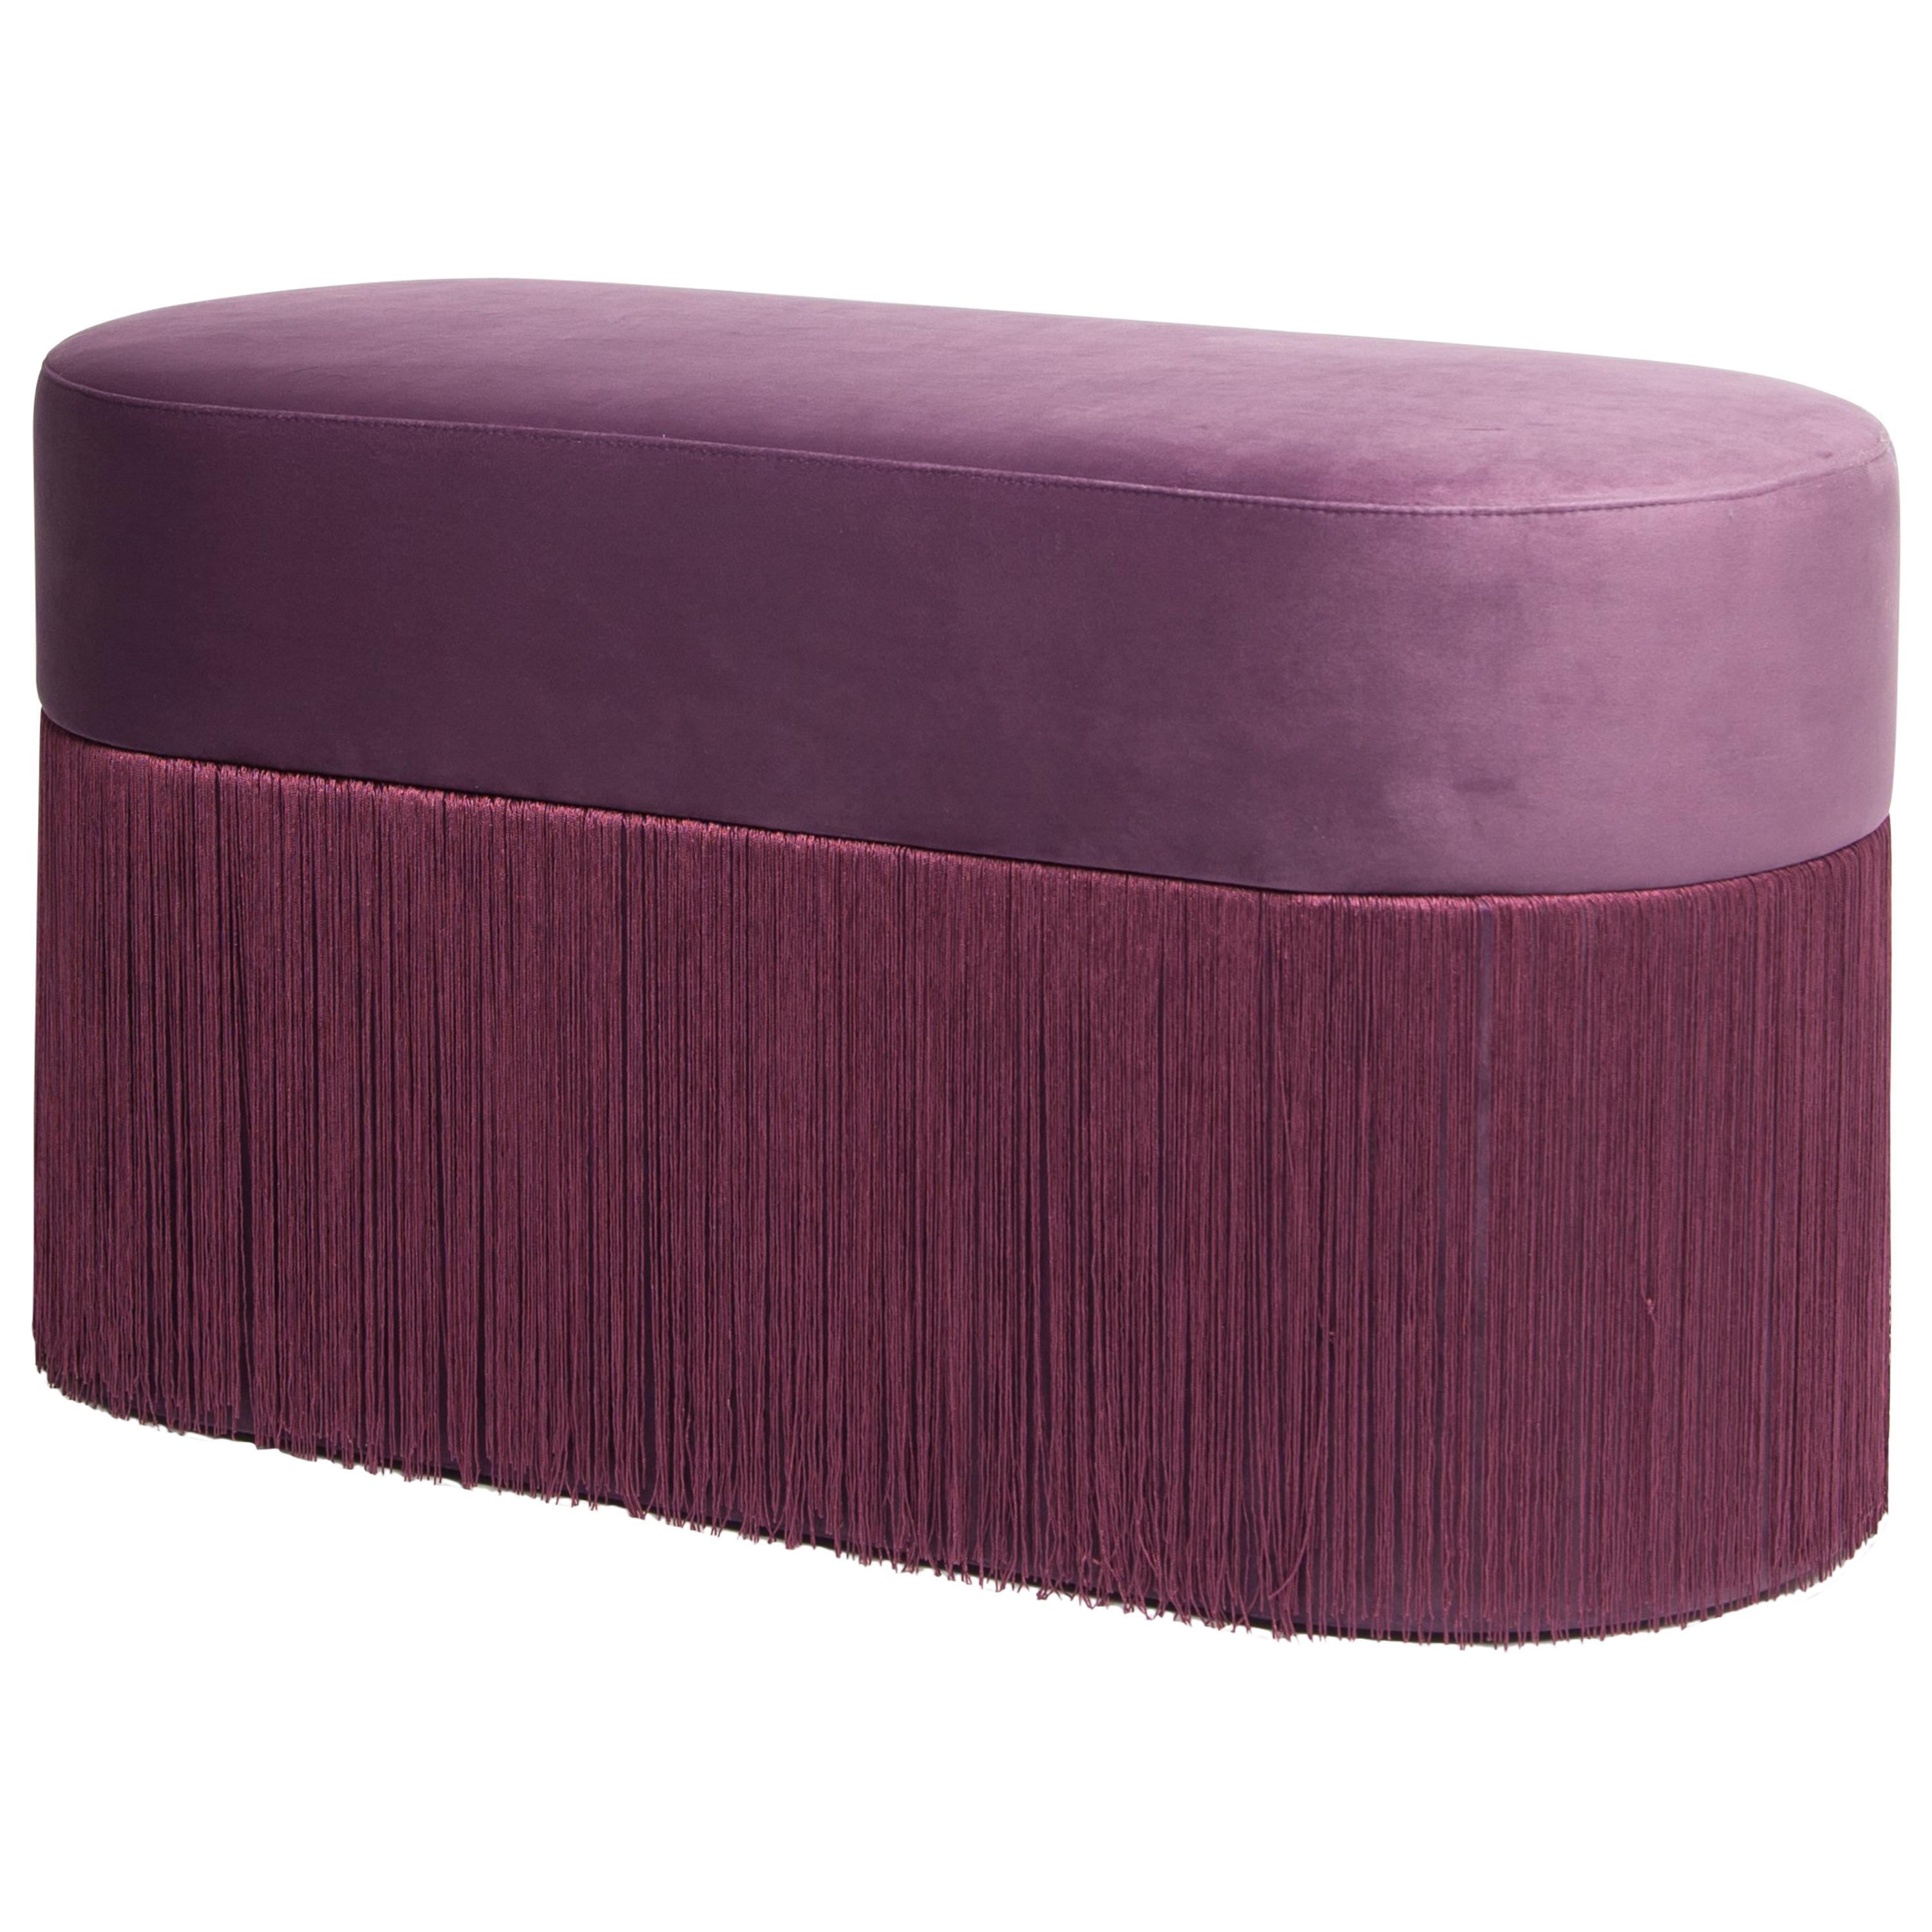 Pouf Pill Large Purple in Velvet Upholstery with Fringes For Sale